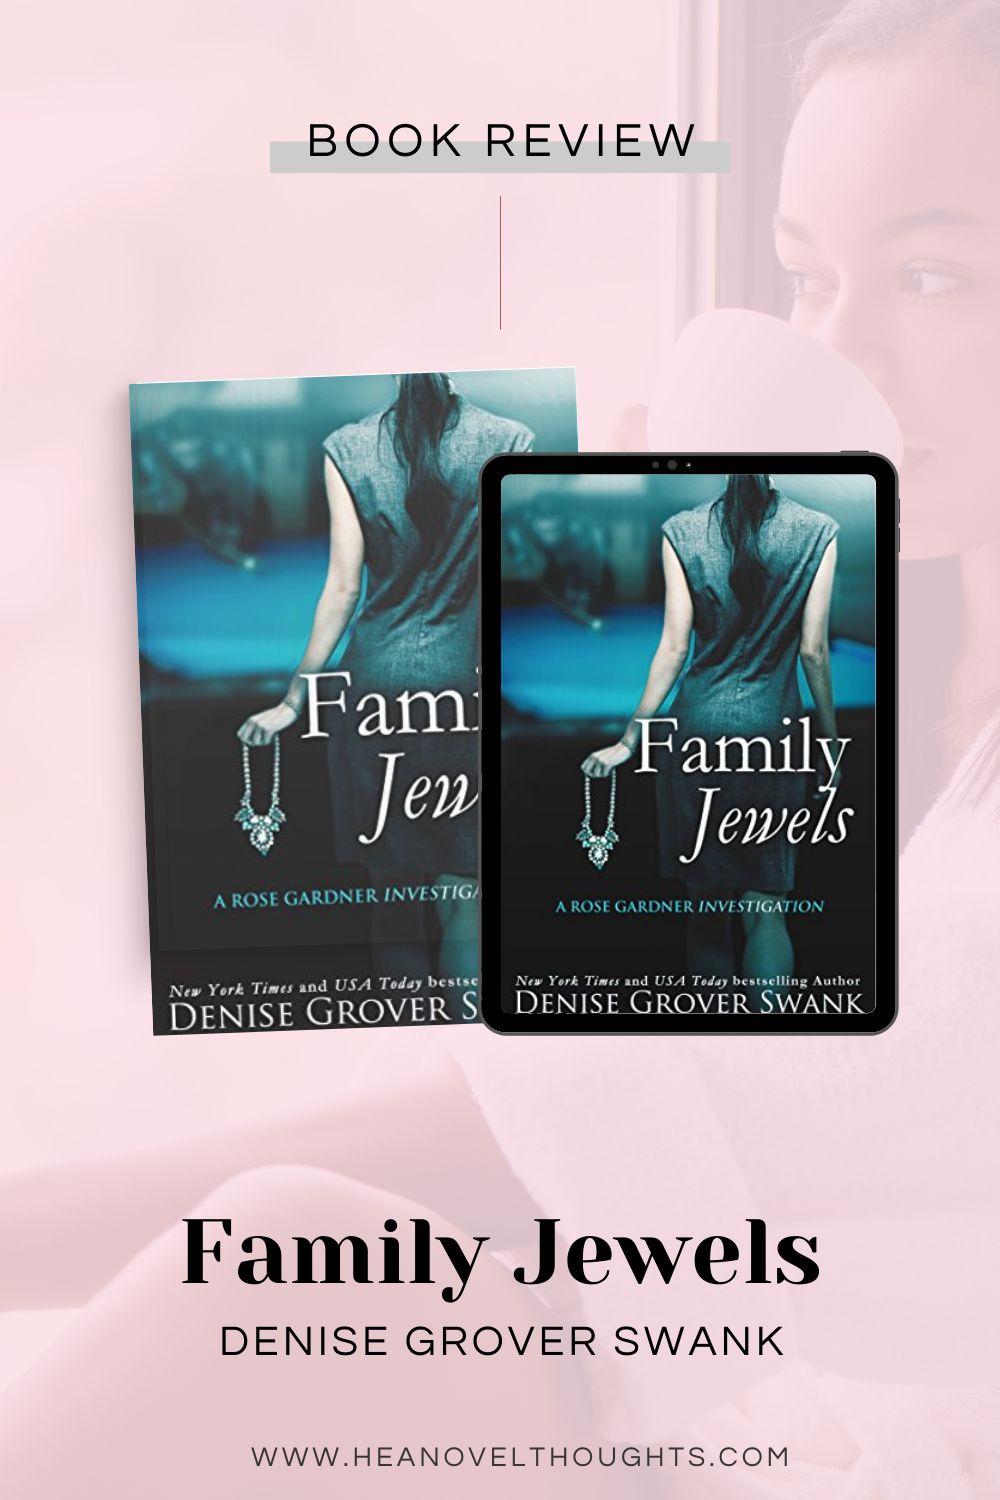 Family Jewels by Denise Grover Swank